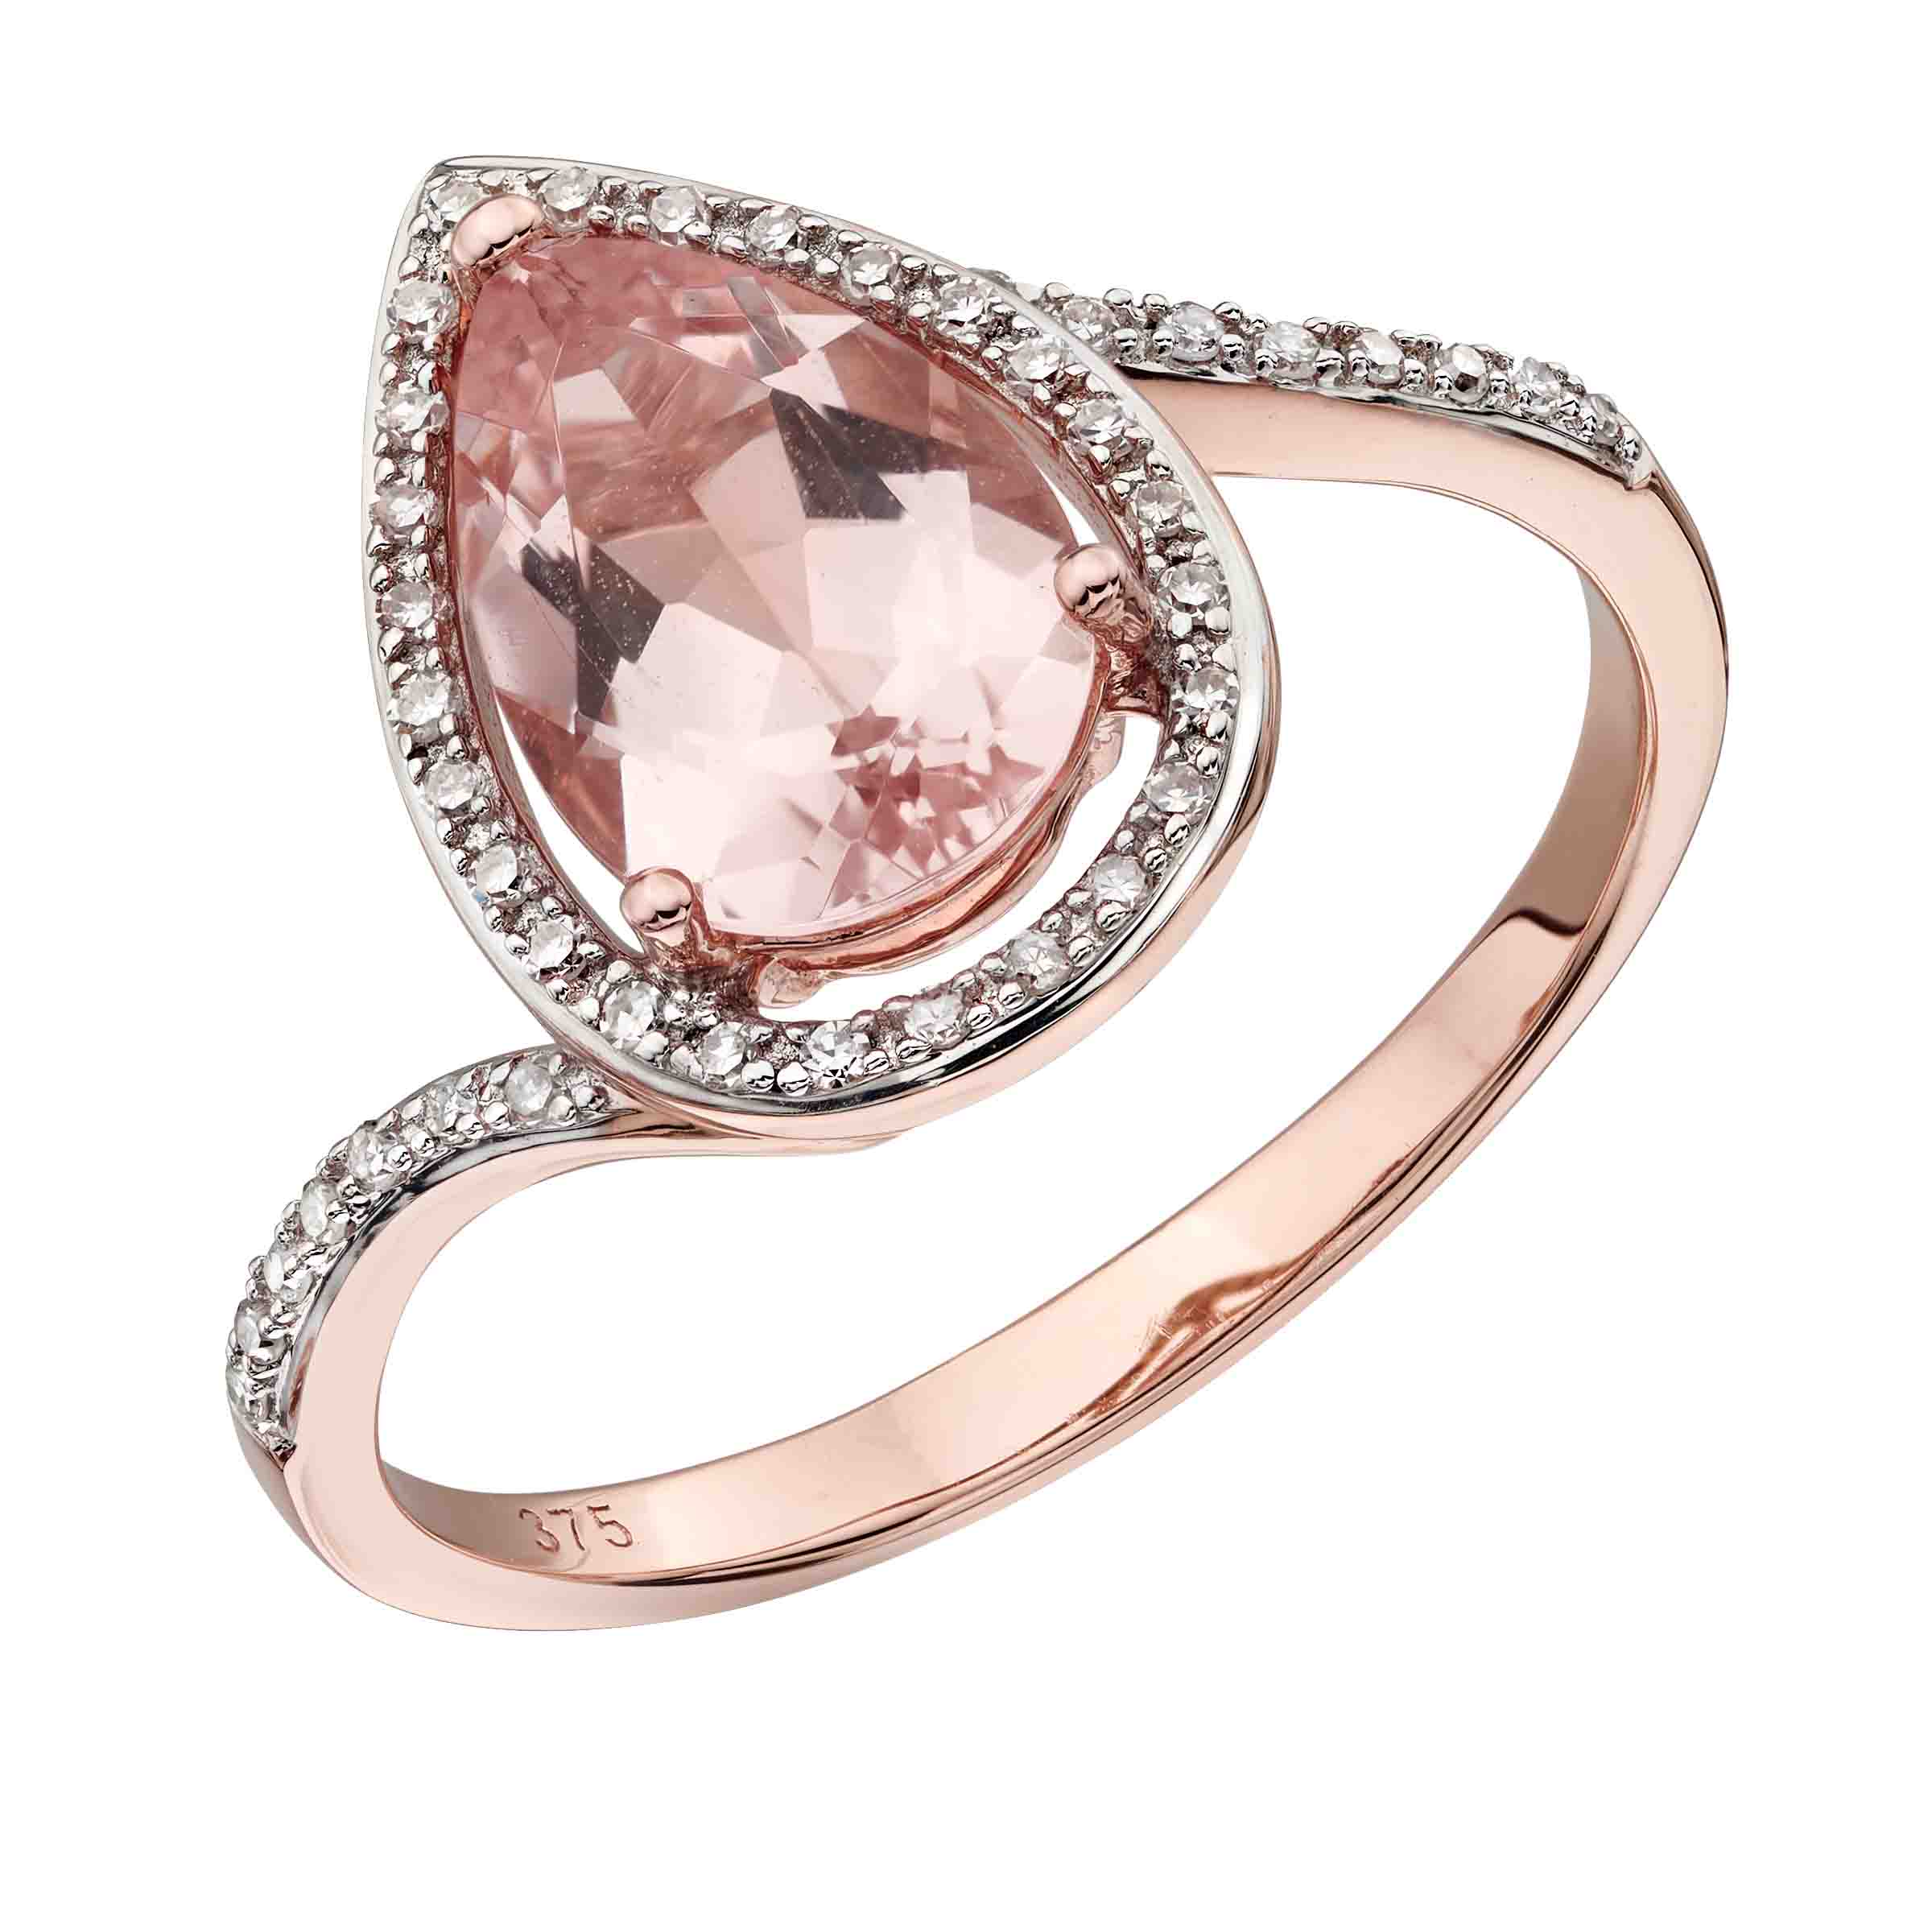 9ct rose gold pear morganite & diamond cluster ring on Sally Thorntons jewellery blog from AA Thornton Kettering Northampton